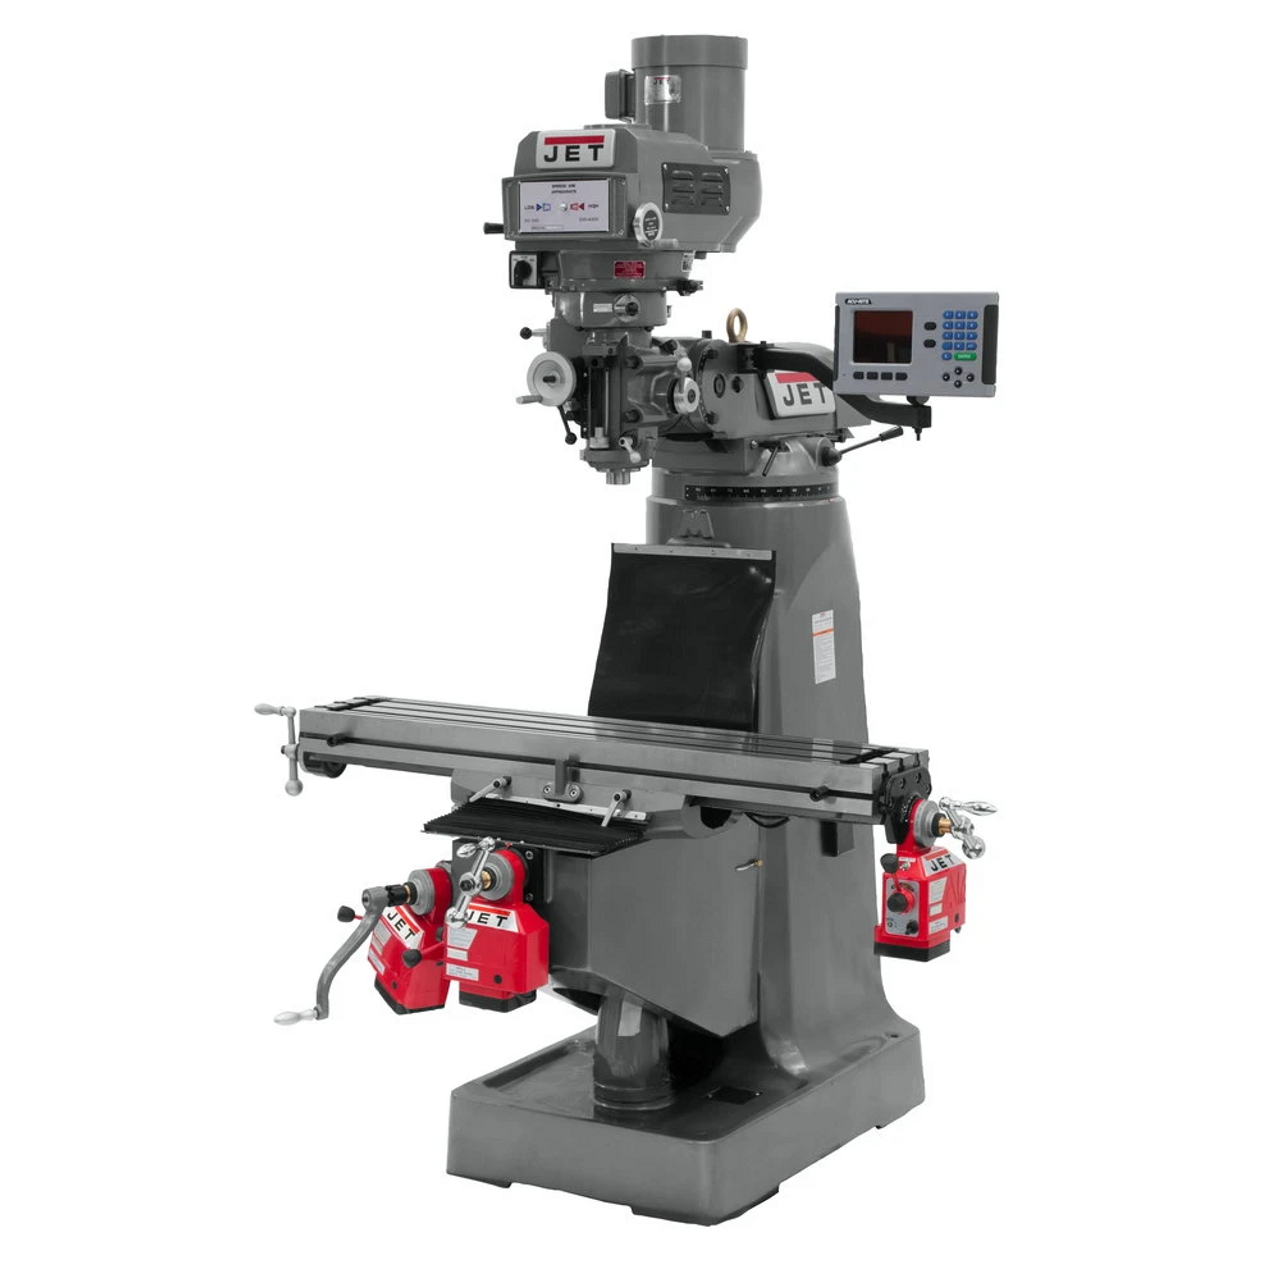 JET JTM-4VS Mill with 3-Axis ACU-RITE 203 DRO (Quill) with X,Y and Z-Axis Powerfeeds 460V